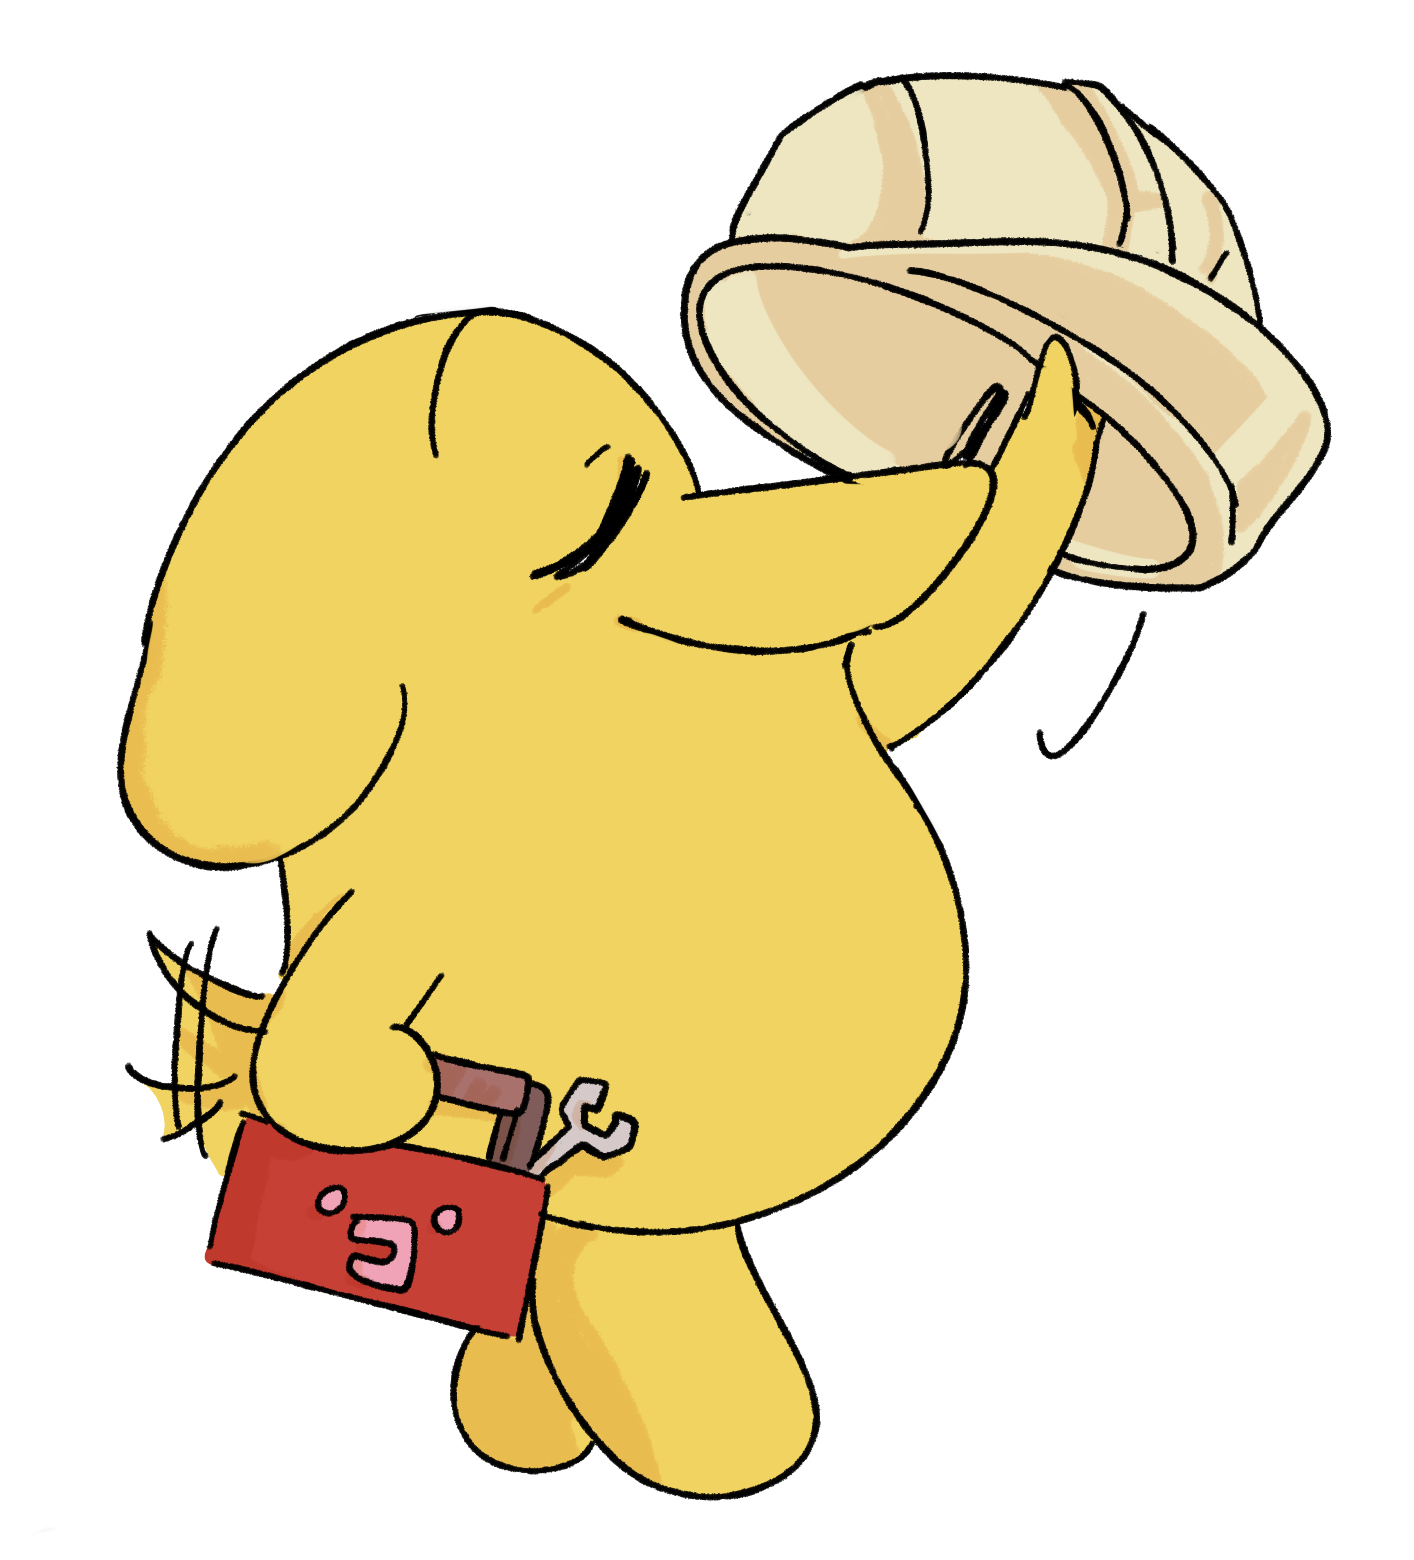 Artwork of the character Potchitchi, carrying a toolbox. They are partially in the middle of lifting up a hardhat to put on their head.